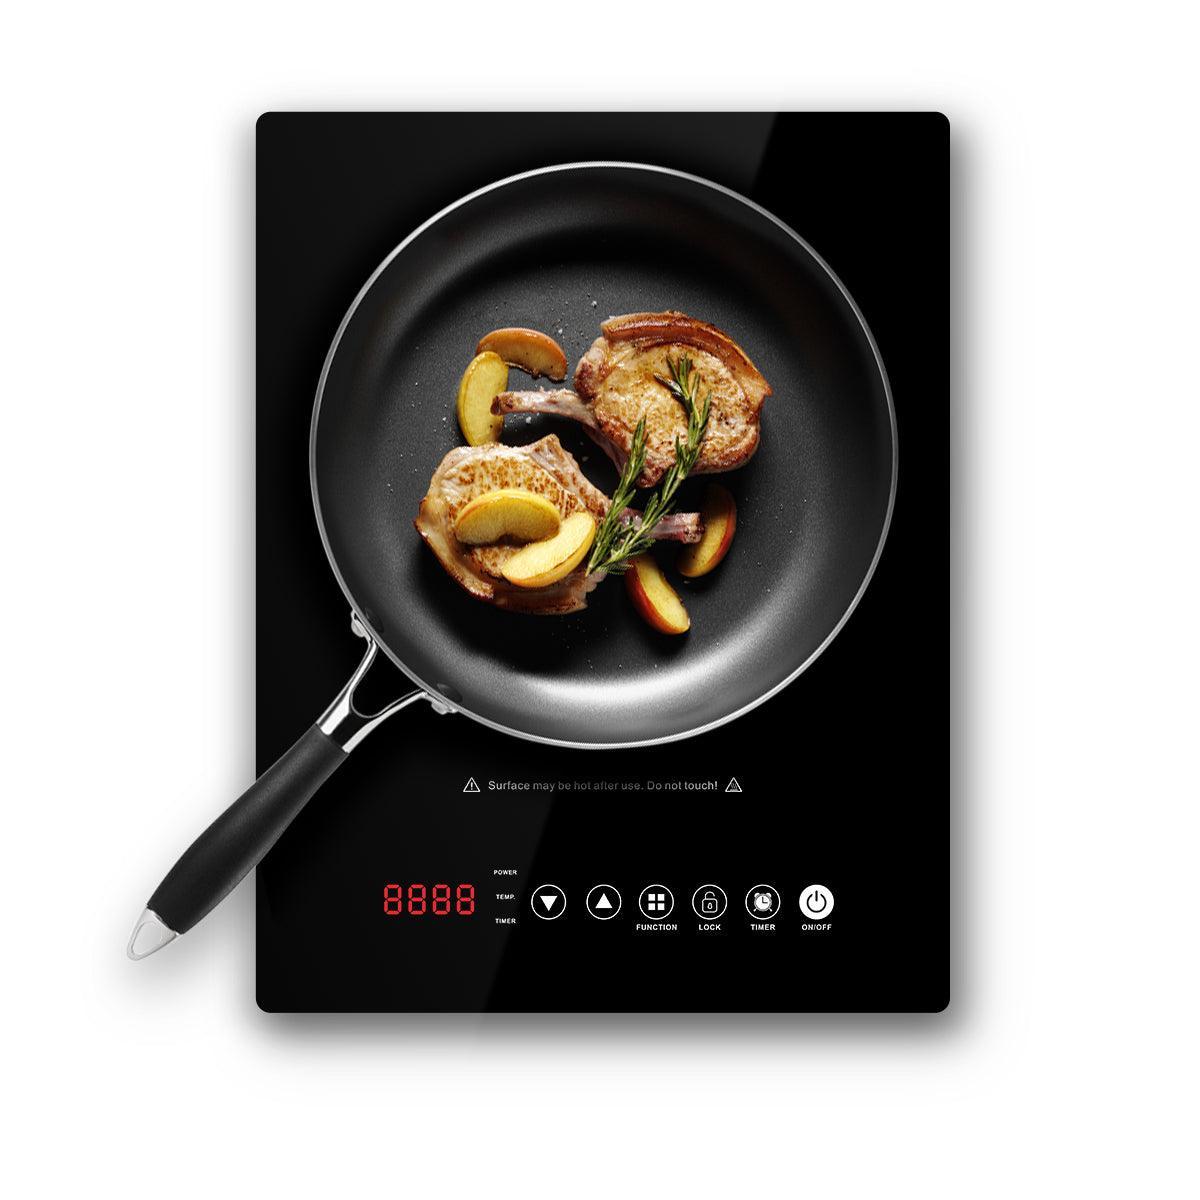 Upgraded to 1800W Single Burner,Electric Cooktop,Hot Plate for Cooking, Electric